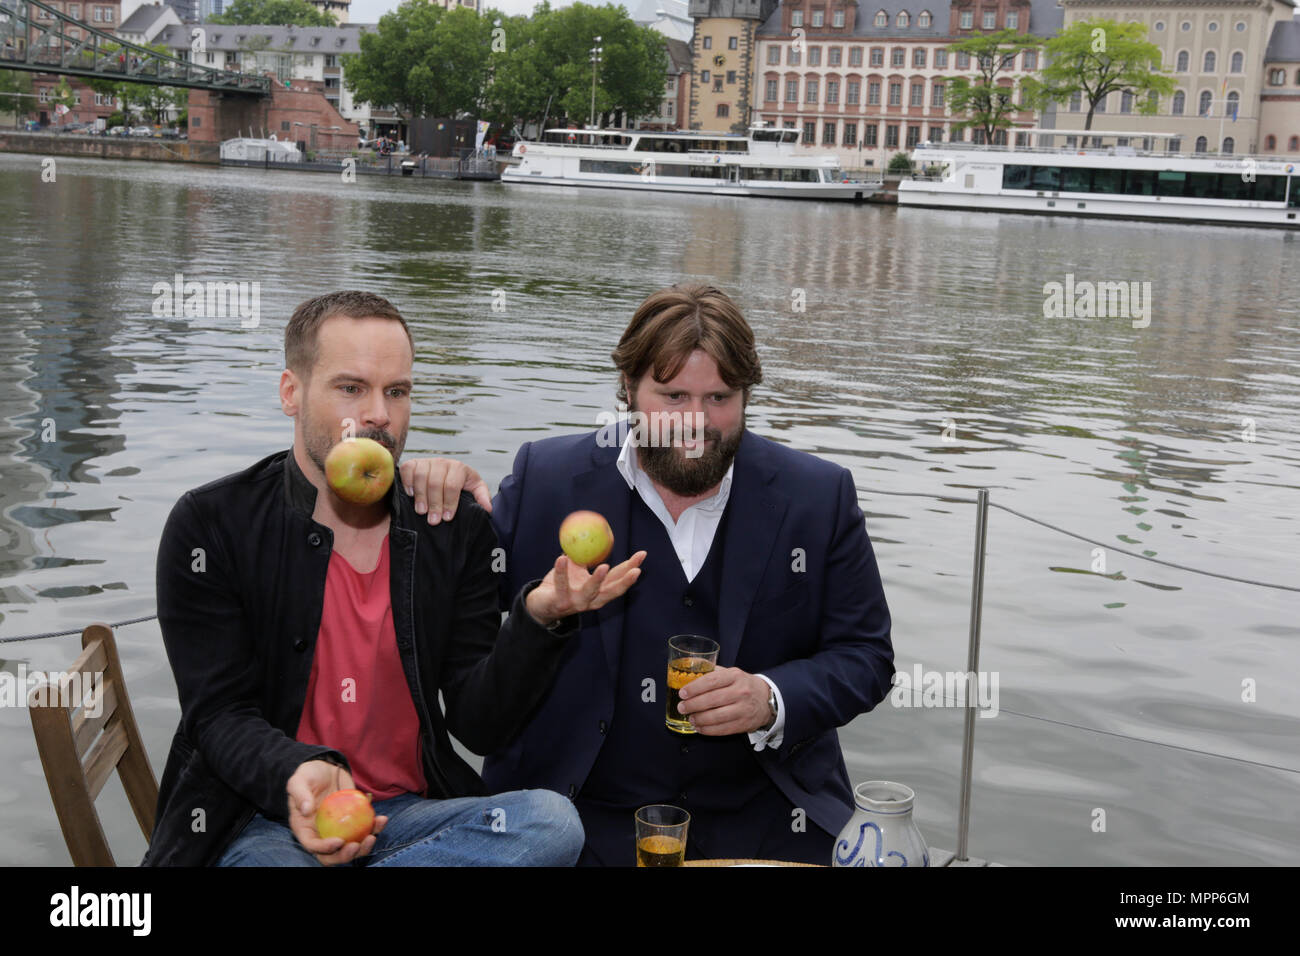 Frankfurt, Germany. 24th May 2018. Actors Wanja Mues (left) and Antoine Monot, Jr. (right) pose on the terrace of the houseboat that is owned by Mues' character Leo in the TV show with two glasses of cider and a Bembel (a local type of stoneware jug, used for cider).  Wanja Mues juggles three apples. 4 new episodes of the relaunch of the long running TV series 'Ein Fall fuer zwei’ (A case for two) are being filmed in Frankfurt for the German state TV broadcaster ZDF (Zweites Deutsches Fernsehen). It stars Antoine Monot, Jr. as defence attorney Benjamin ‘Benni’ Hornberg and Wanja Mues as privat Stock Photo